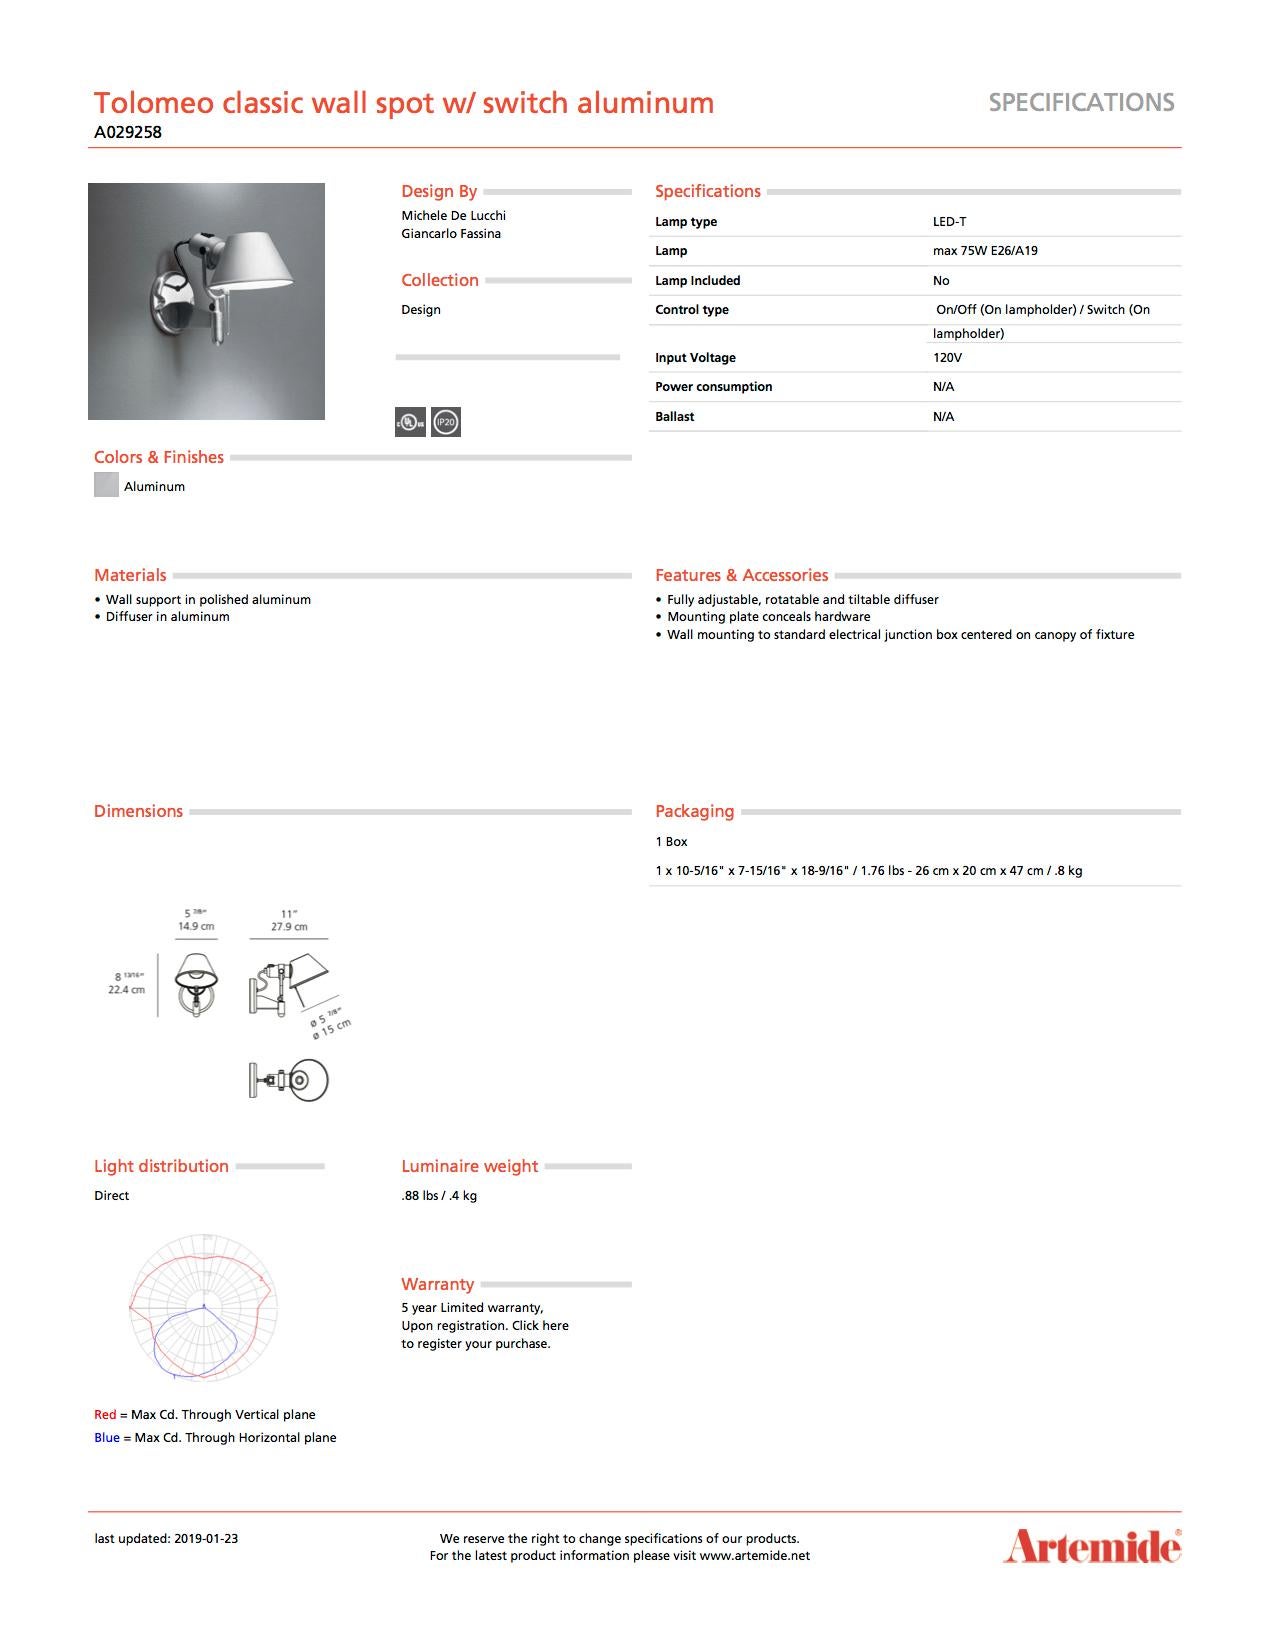 Modern Artemide Tolomeo Classic Wall Spot Light with Switch in Aluminum